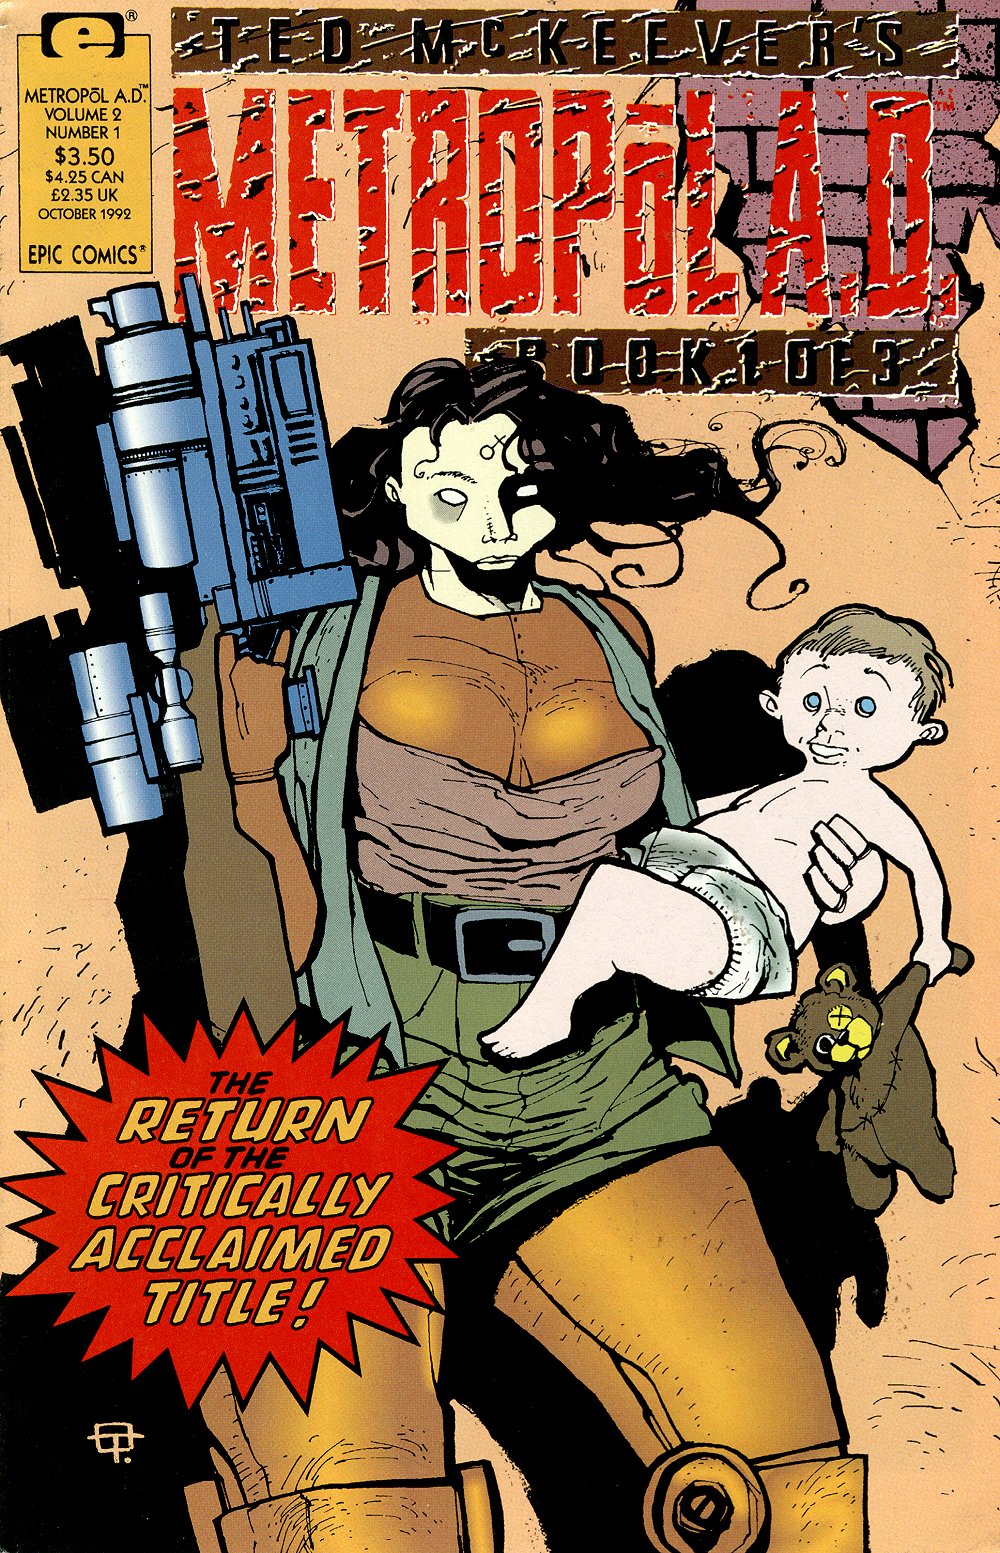 Read online Ted McKeever's Metropol AD comic -  Issue #1 - 1